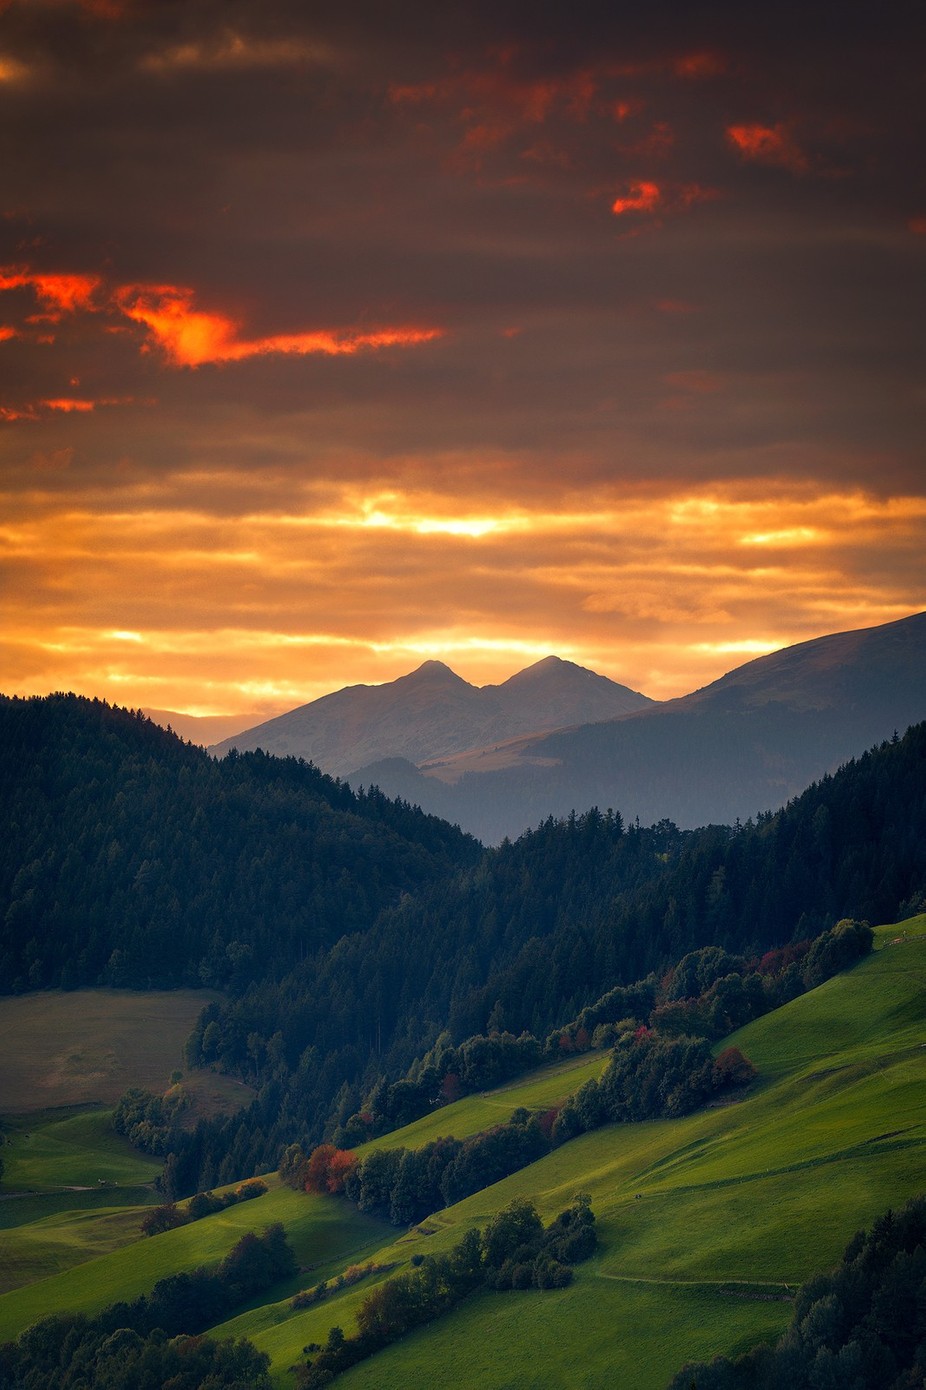 Last light of the Dolomites by Mbeiter - Bright Colors In Nature Photo Contest